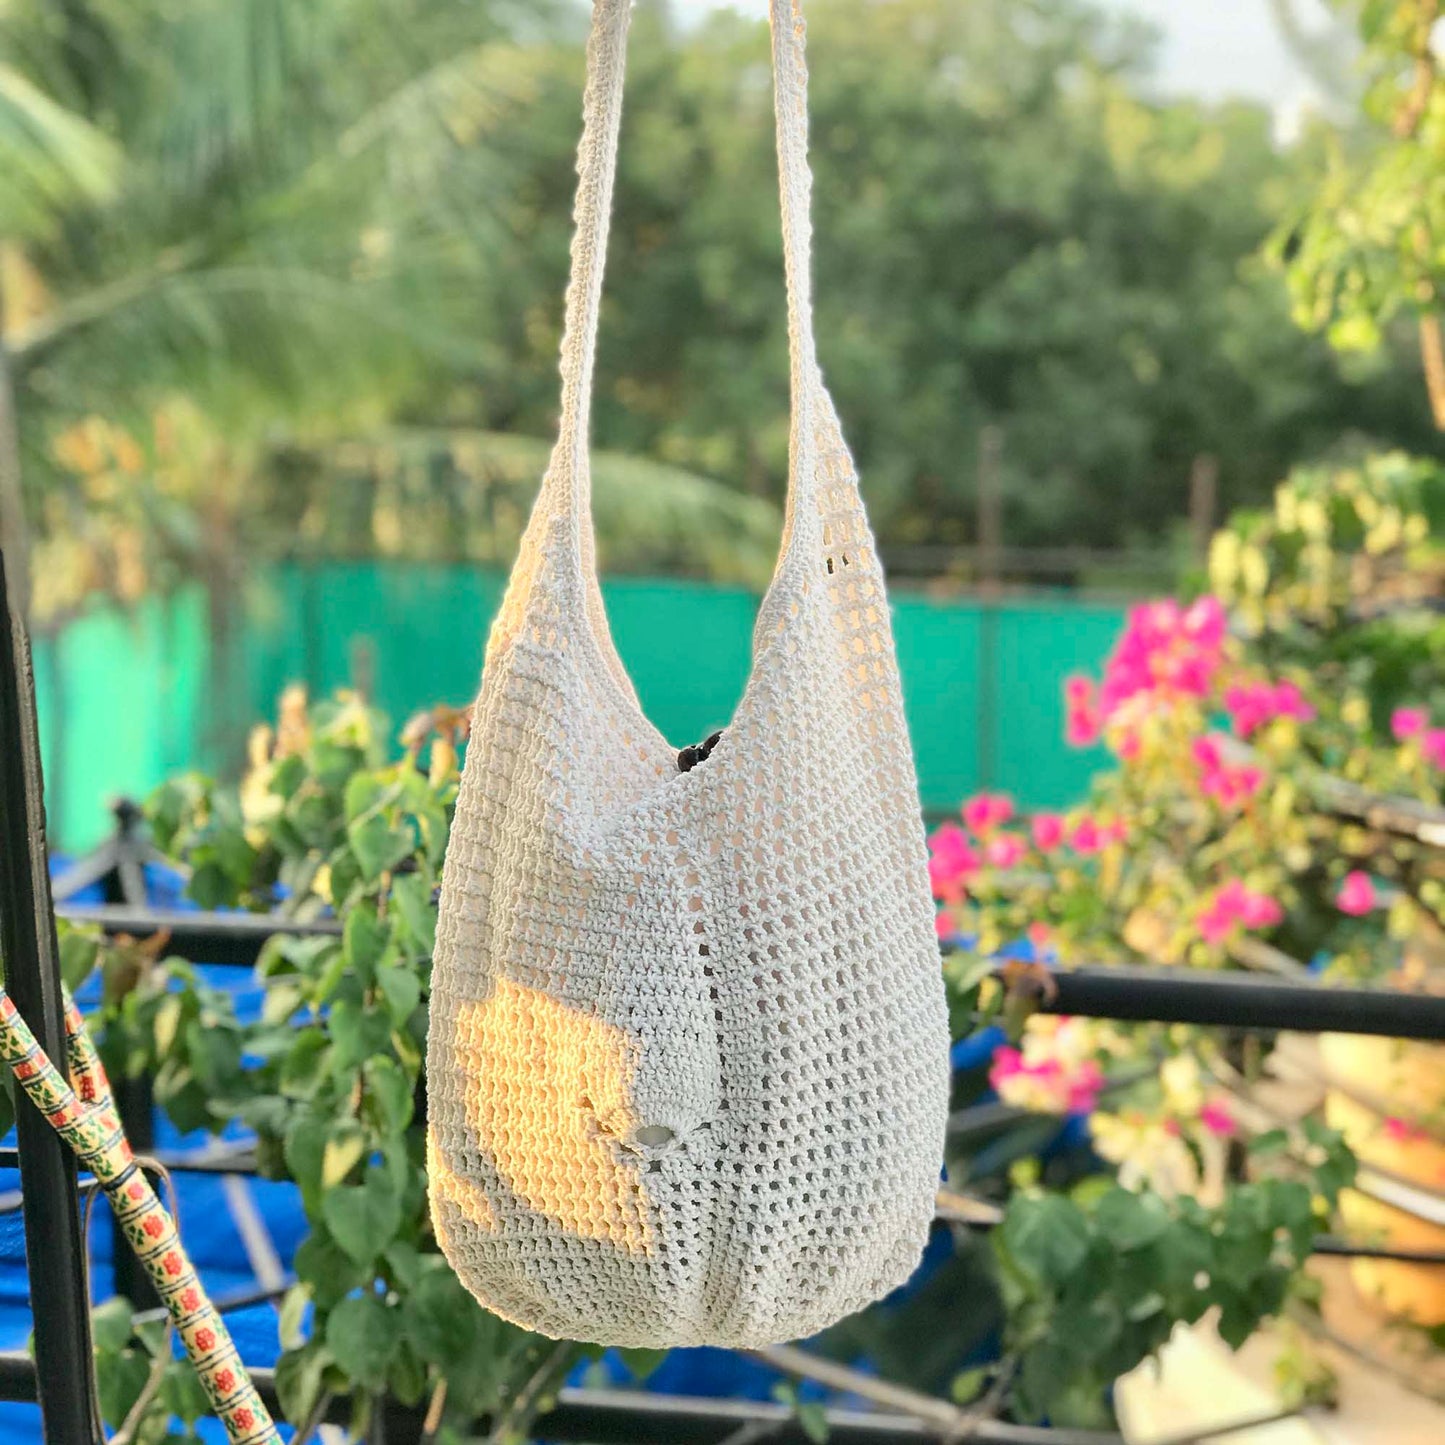 Crochet white Jhola Bag hand-crafted with Crochet work